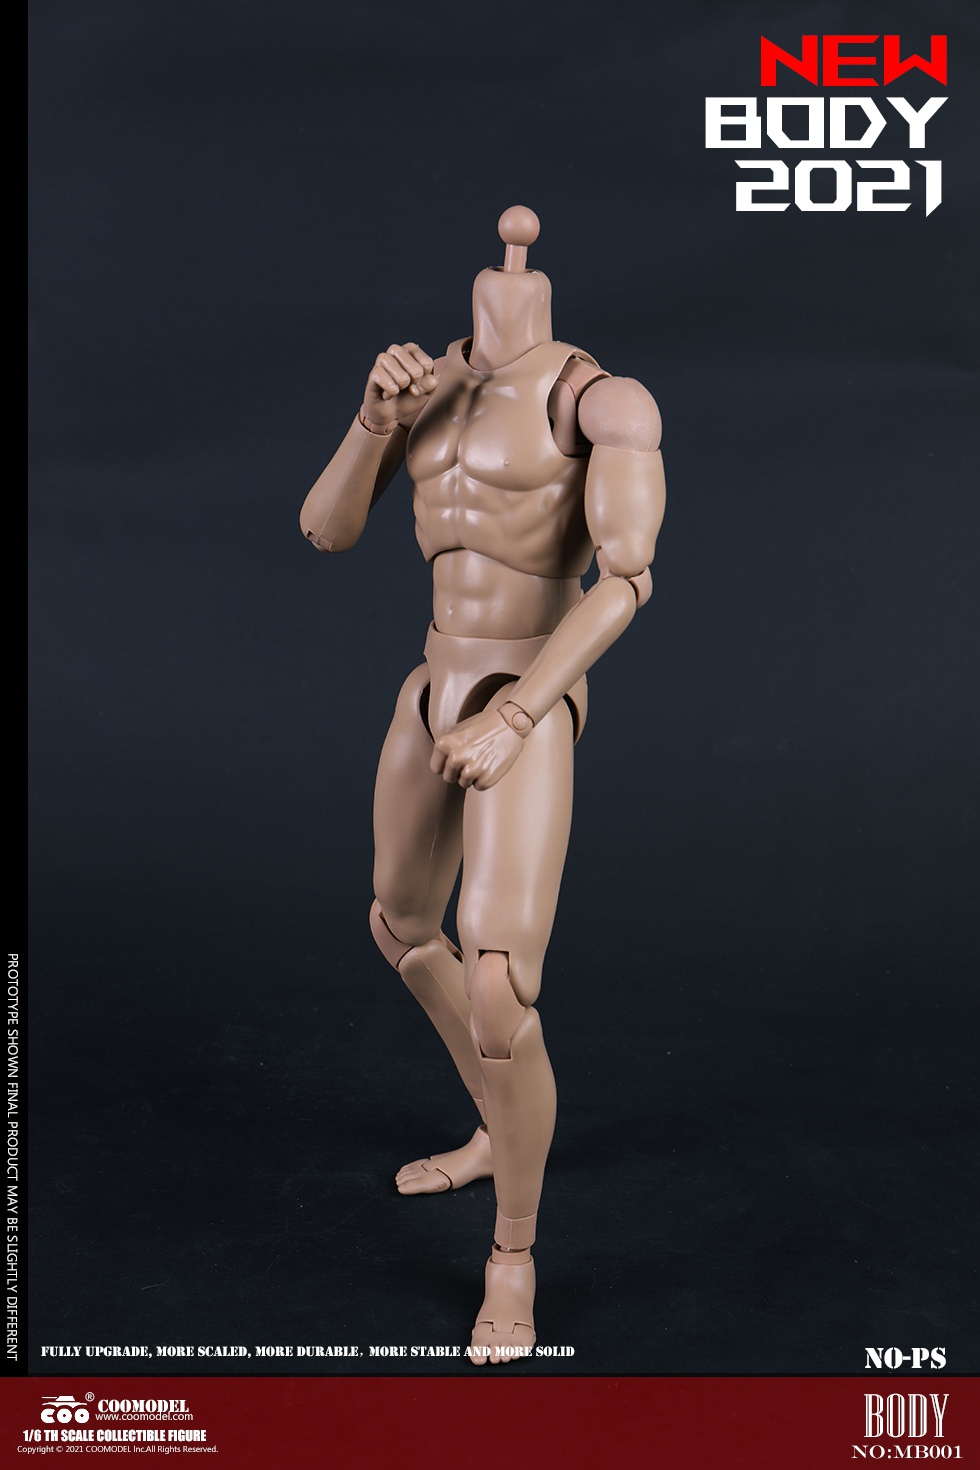 accessory - NEW PRODUCT: COOMODEL: 1/6 MB001 standard male body, MB002 tall male body, MB003 muscle male body, MB004 tall muscle body 18090011